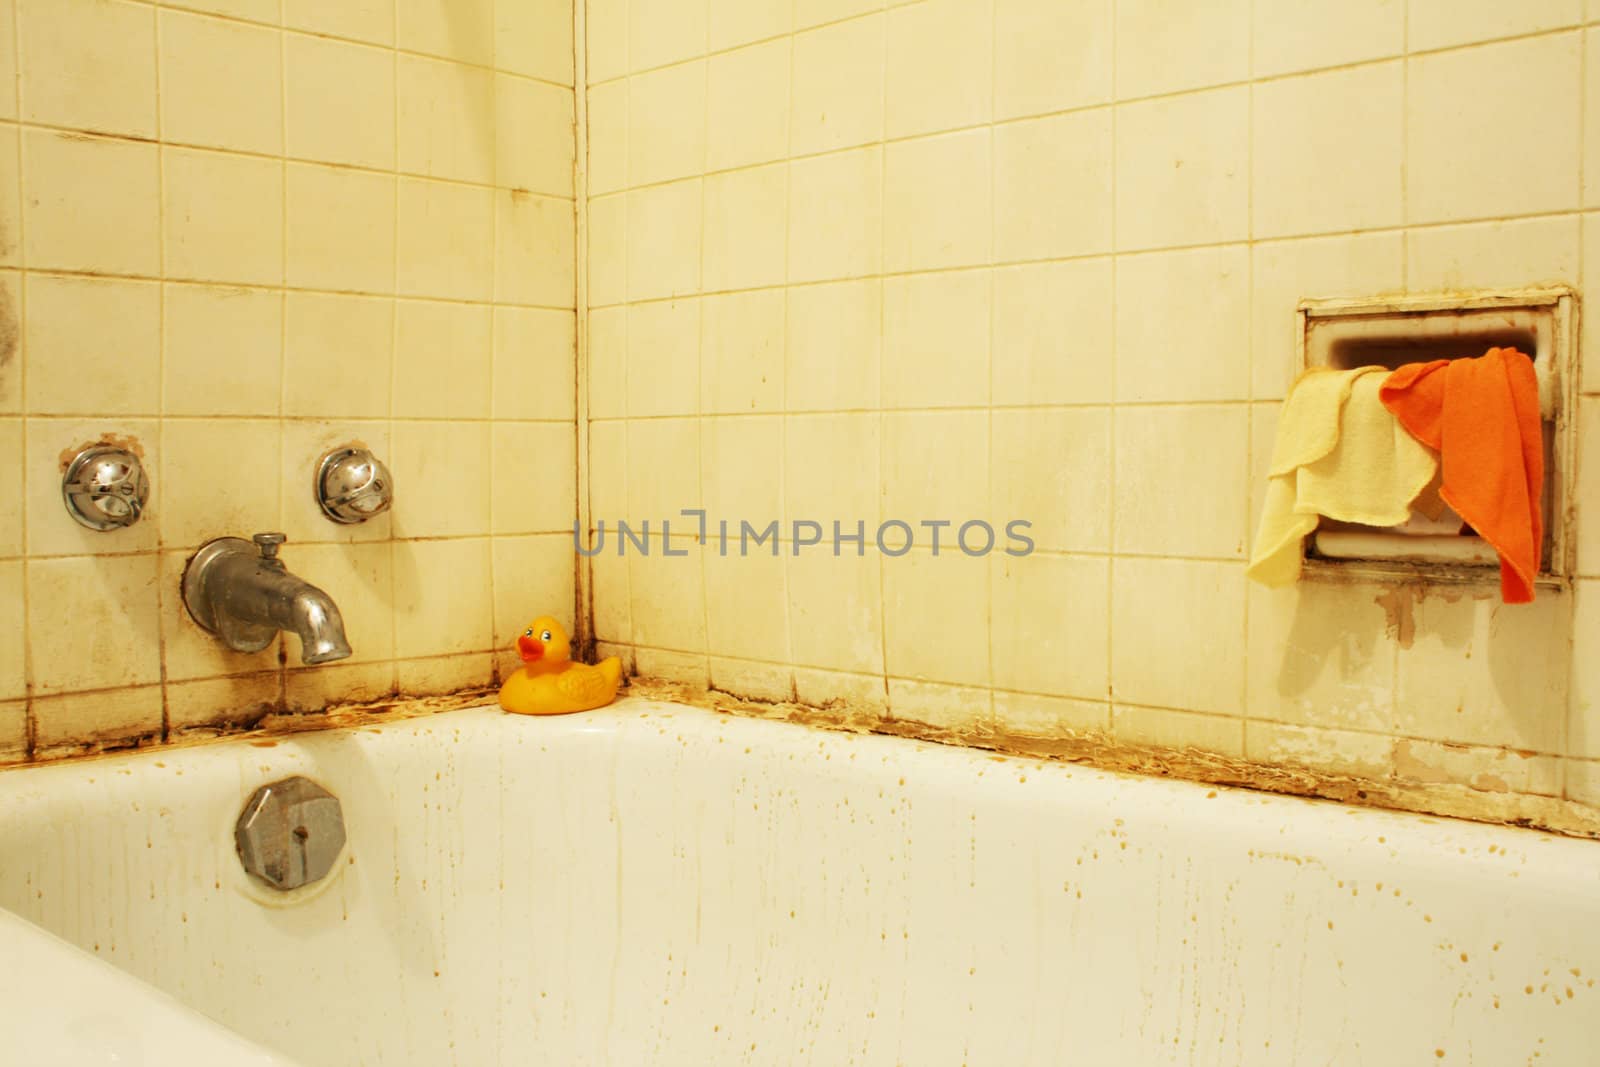 A filthy bathtub with mold and stains and dirty water. Concept for poverty or renovation/repair







A filthy bathtub with mold and stains and dirty water.